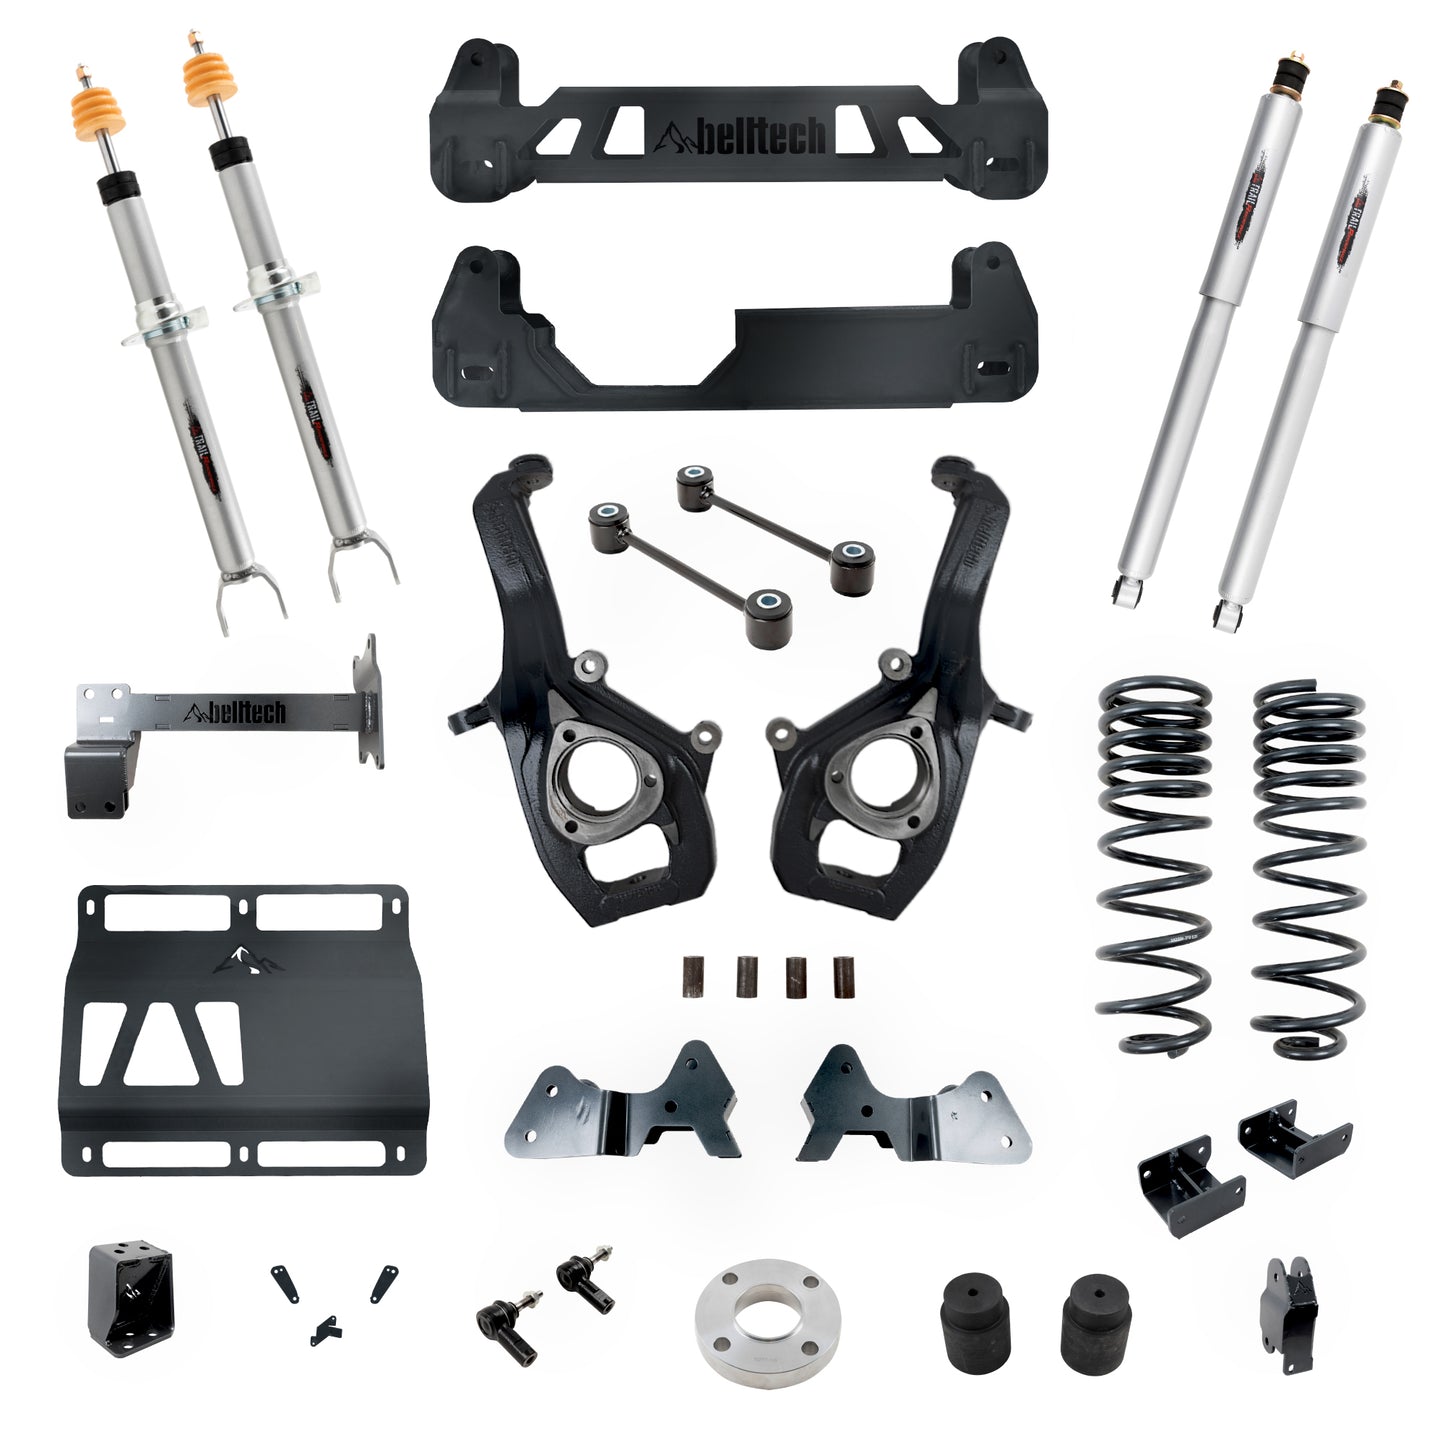 BELLTECH 153712TP LIFT KIT 6-8in. Lift Kit Inc. Front and Rear Trail Performance Struts/Shocks 2019-2021 Ram 1500 4wd (all cabs) 6-8in. Lift